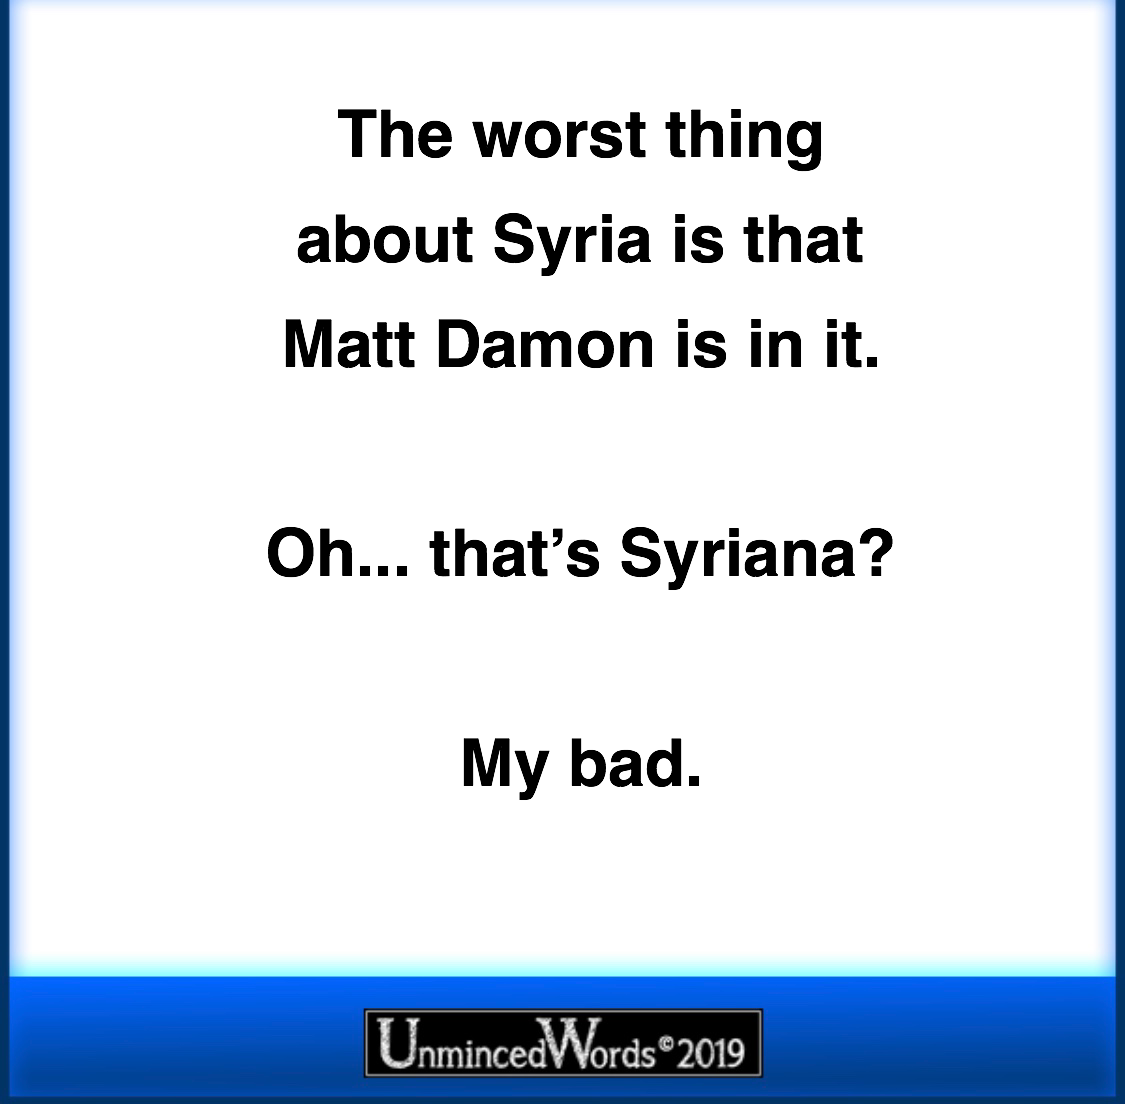 The worst thing about Syria is...